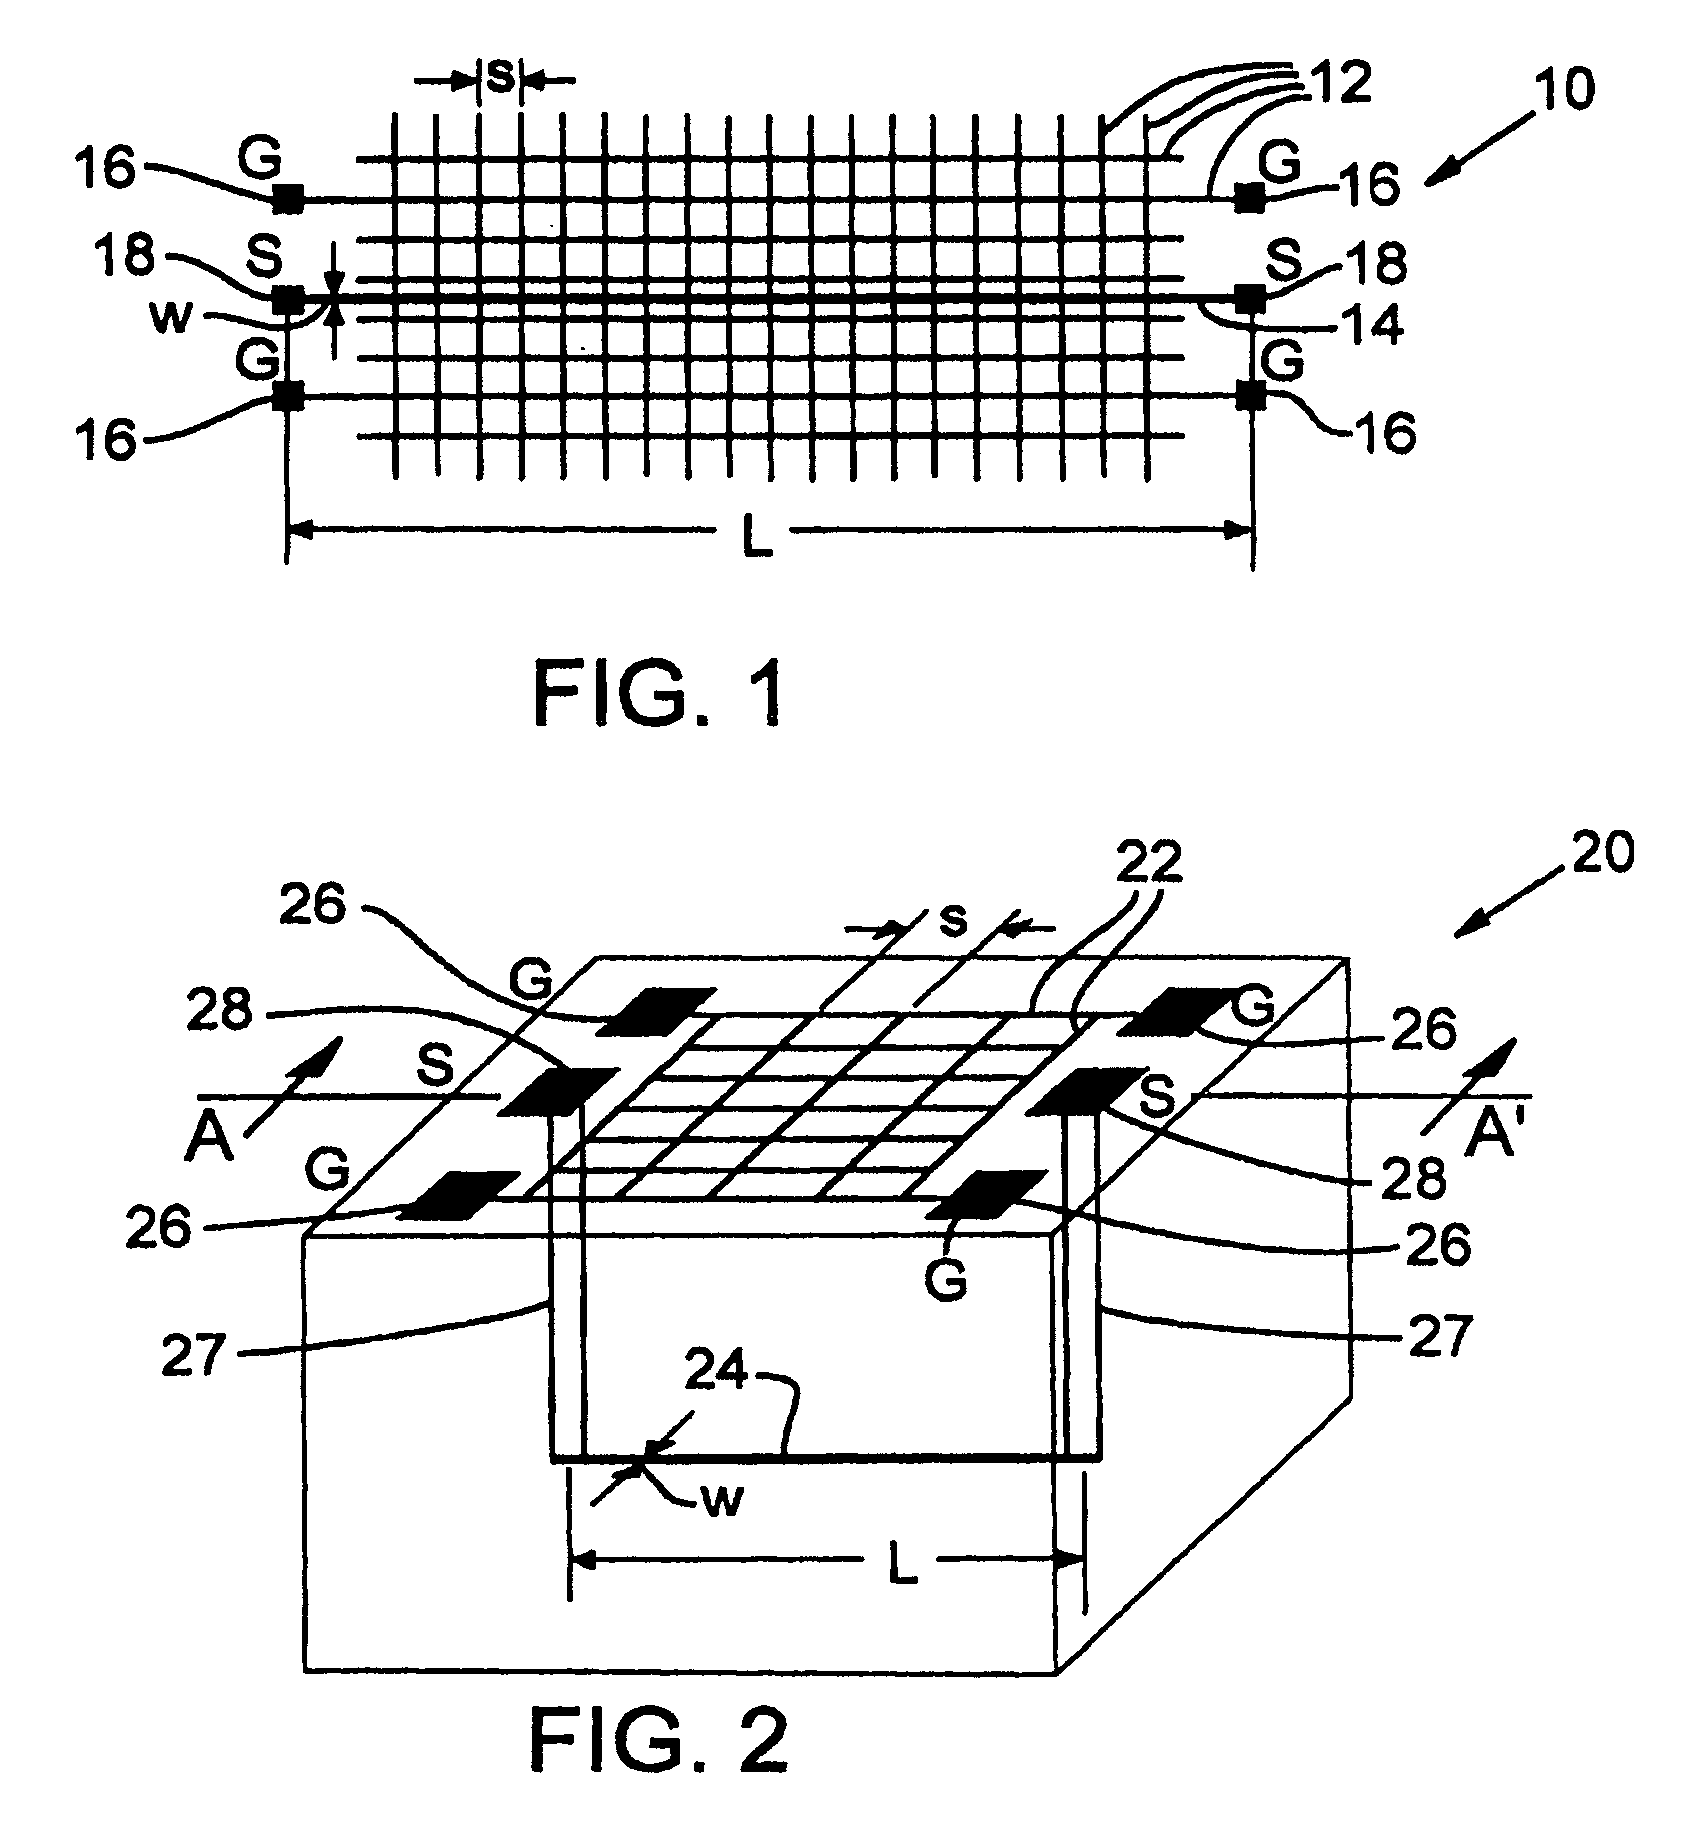 Test structures and method for interconnect impedance property extraction